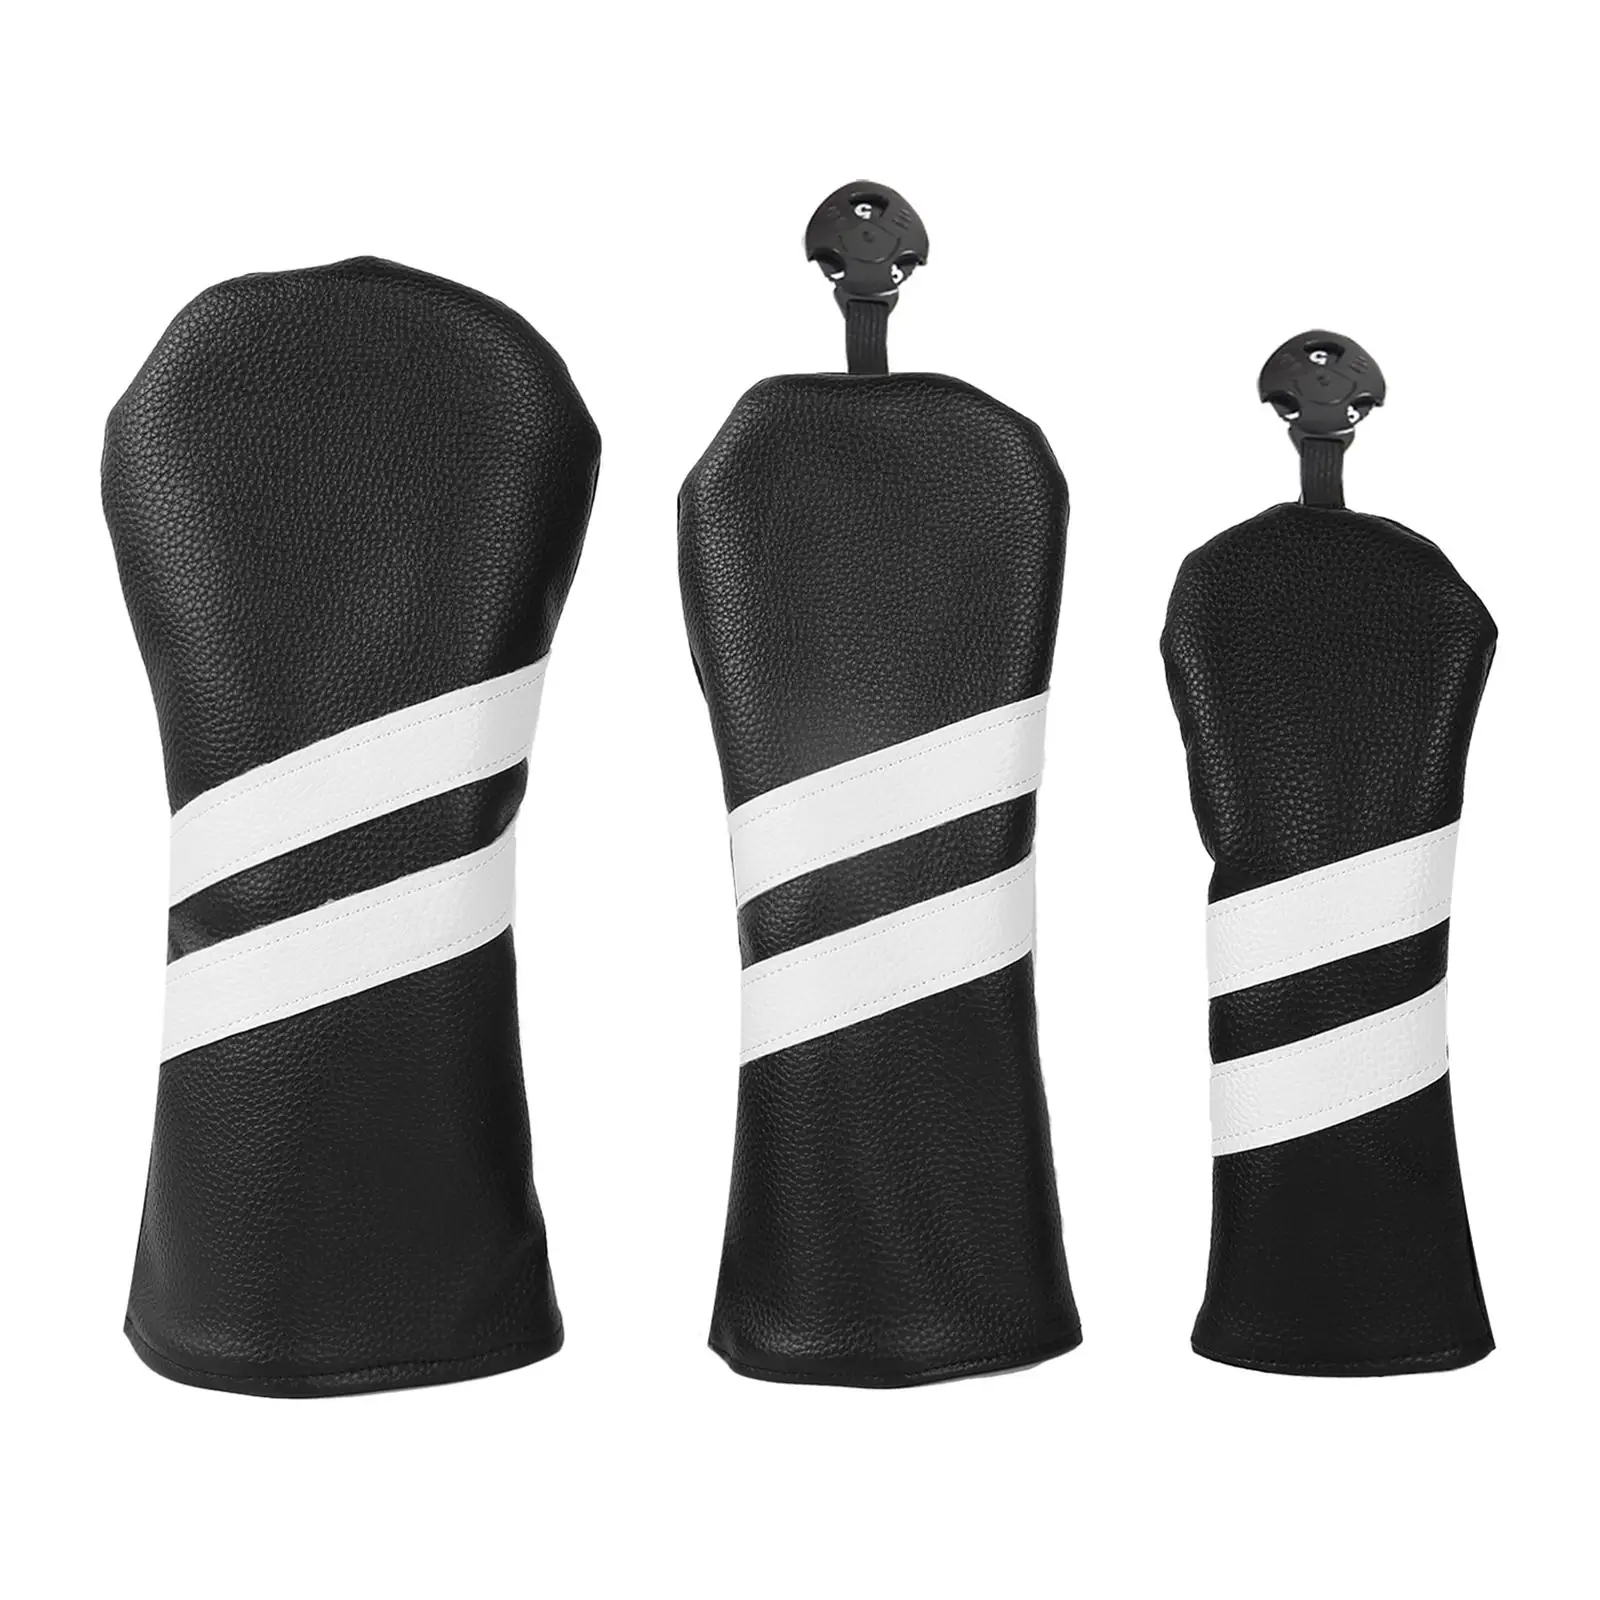 

3 Pieces Golf Wood Headcover Fleece Lined Scratchproof for Driver, Woods and Hybrid Long Neck Golf Club Head Cover Golfer Gift